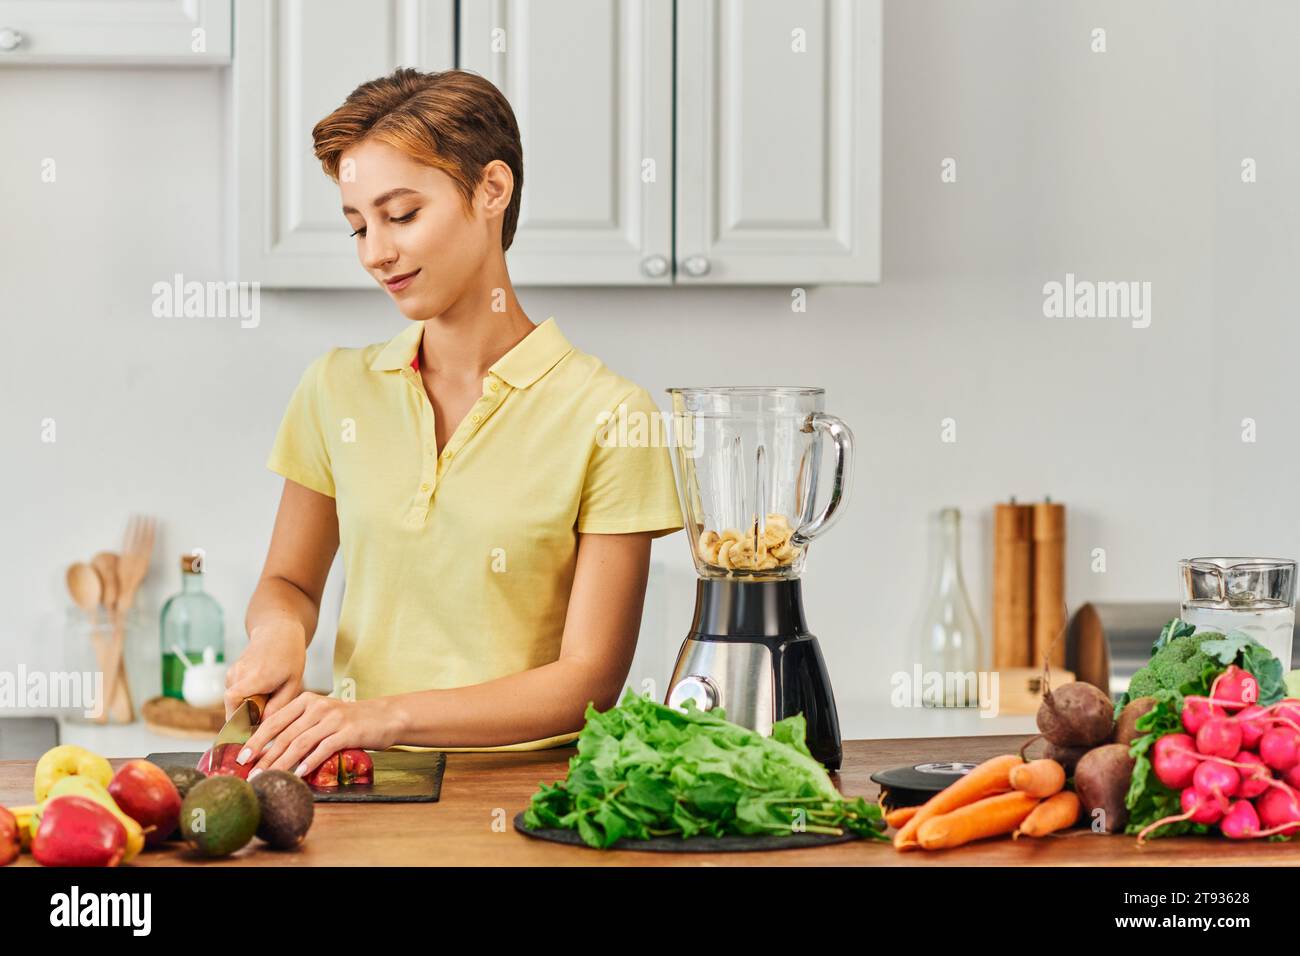 young vegetarian woman cutting apple near electric blender and assortment of vegetables and fruits Stock Photo